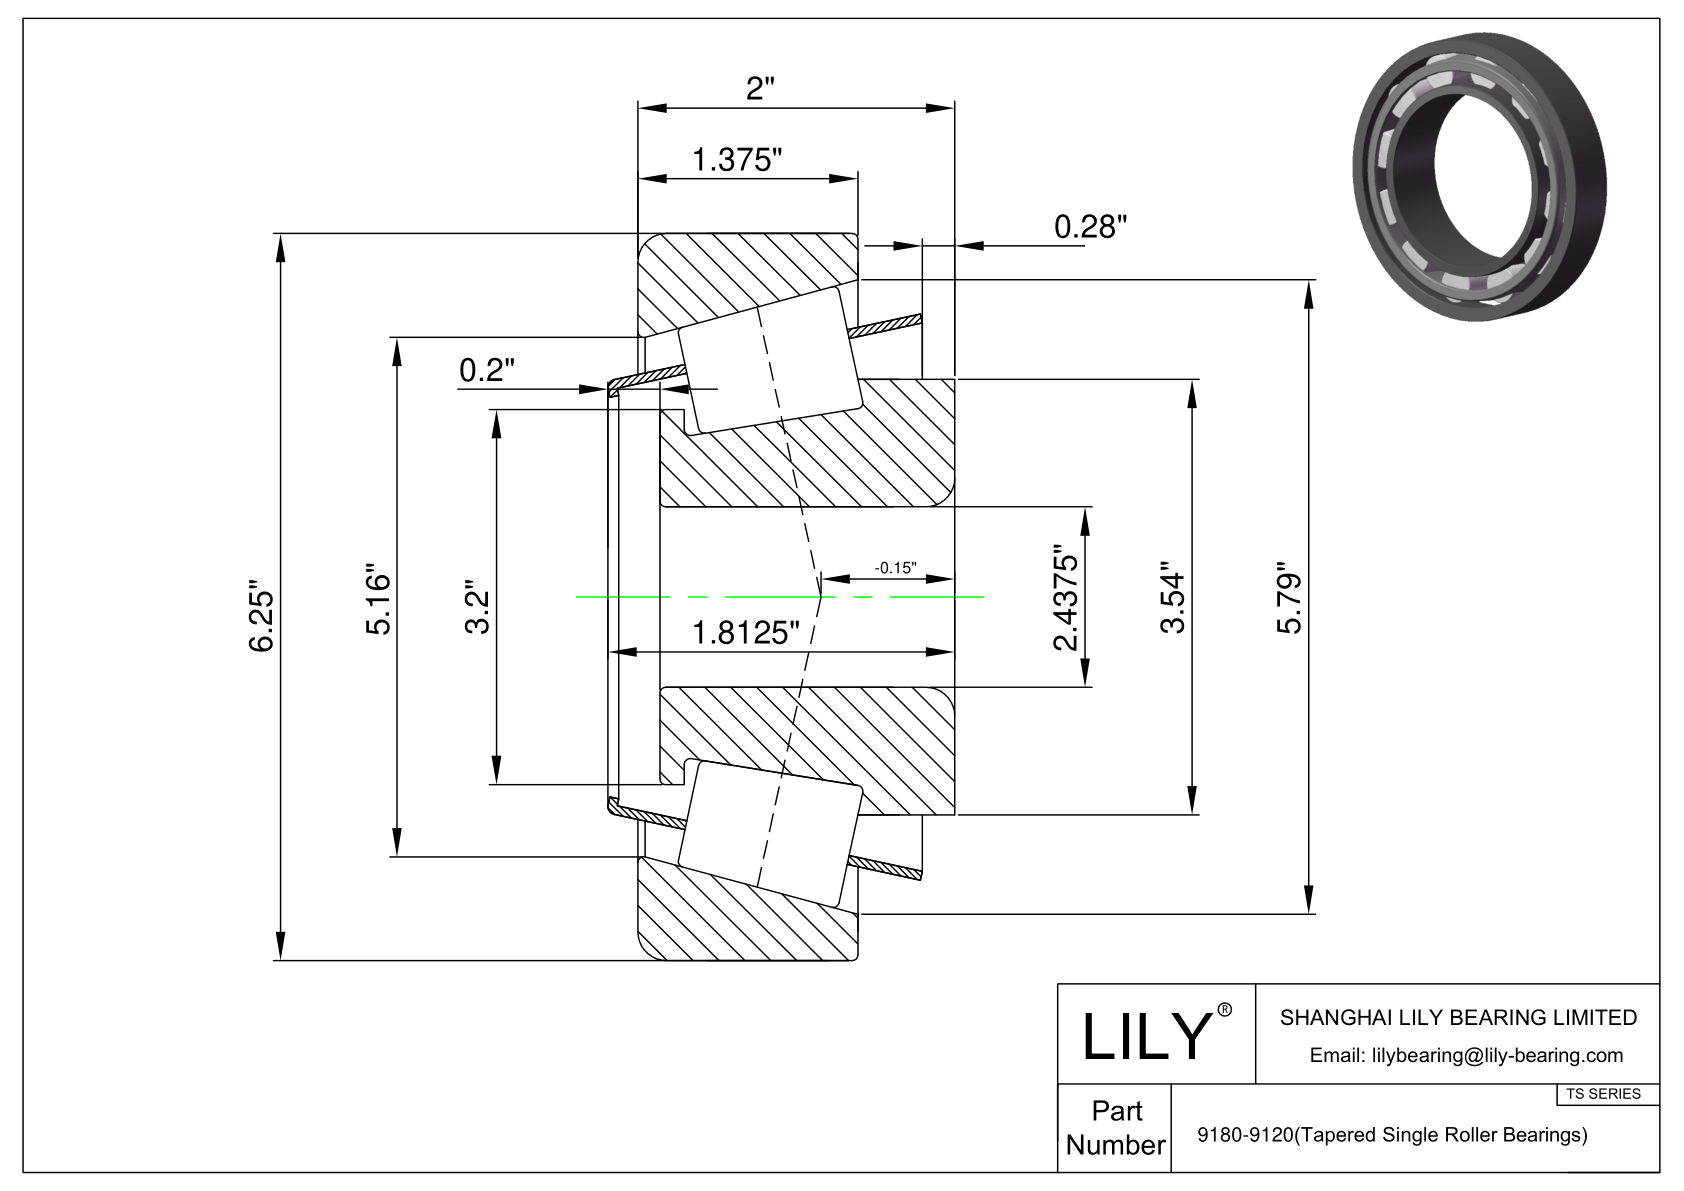 9180-9120 TS (Tapered Single Roller Bearings) (Imperial) cad drawing